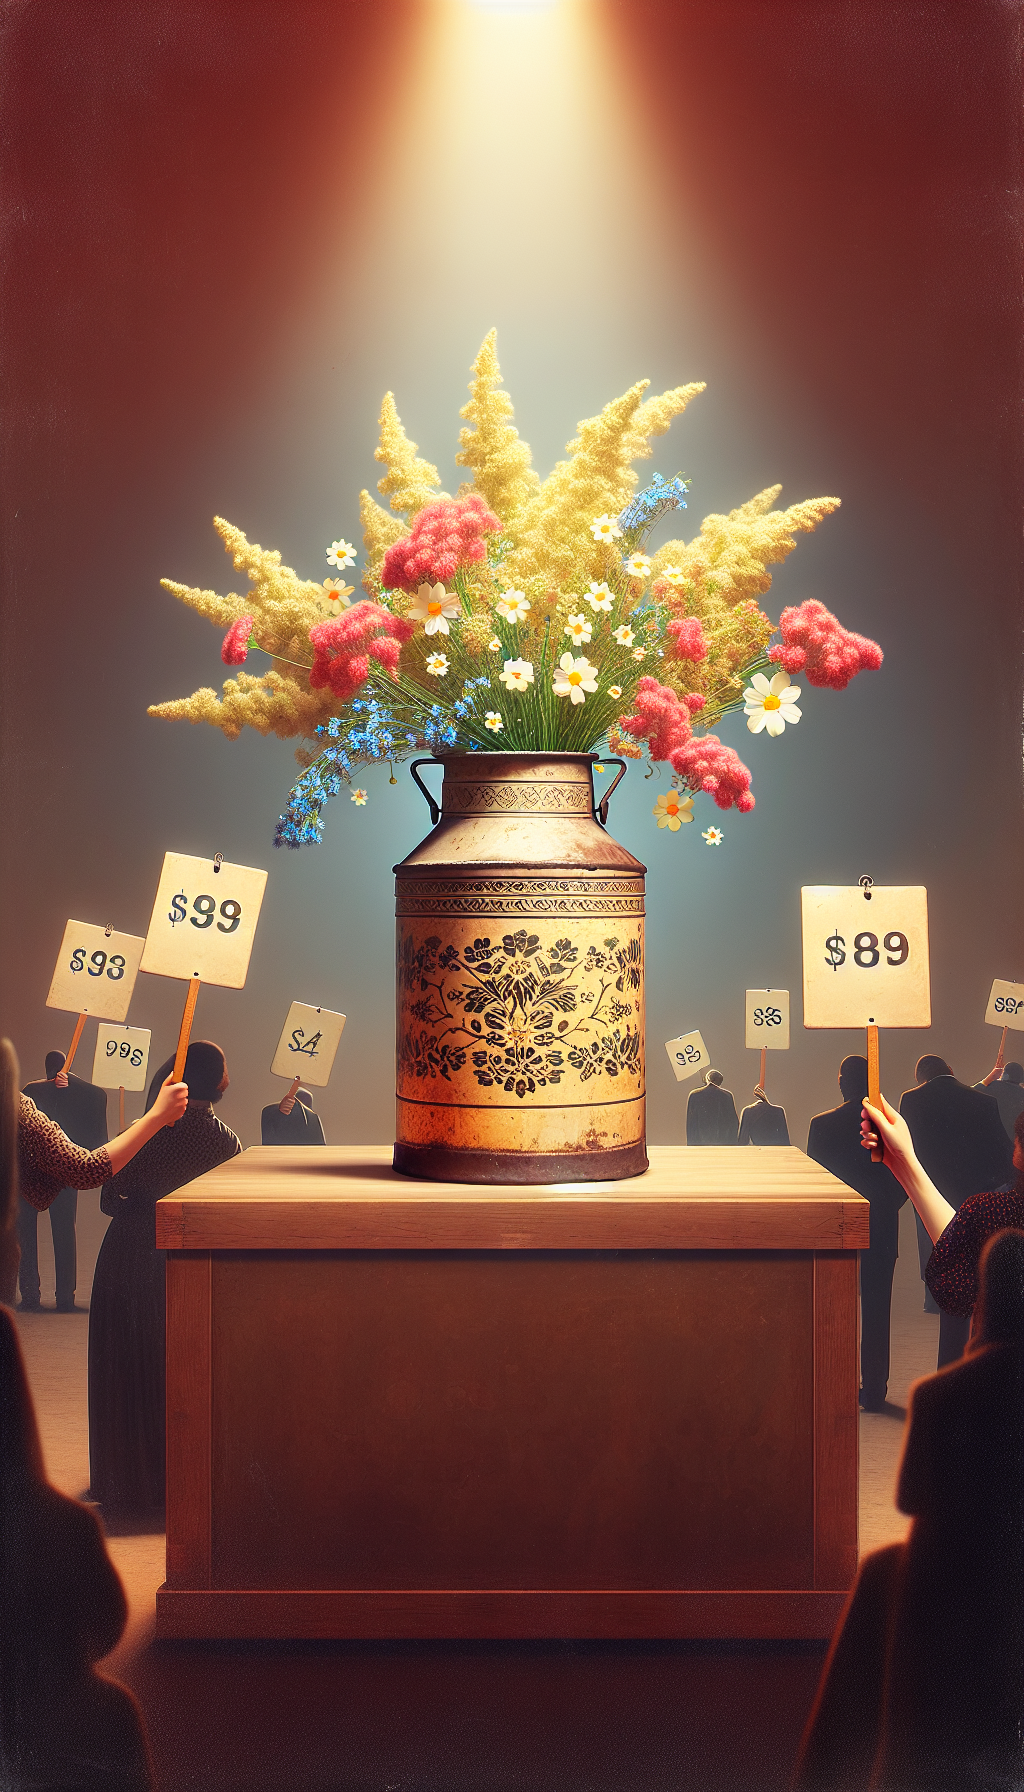 An illustration of a rustic, vintage milk can transformed into an elegant vase, filled with vibrant wildflowers. The can sits atop an auction podium with a spotlight highlighting its intricate designs, while in the background, shadowy figures raise paddles with price tags, showcasing its collectible value. The contrast between the pastoral function and its newfound decorative allure is artfully depicted.